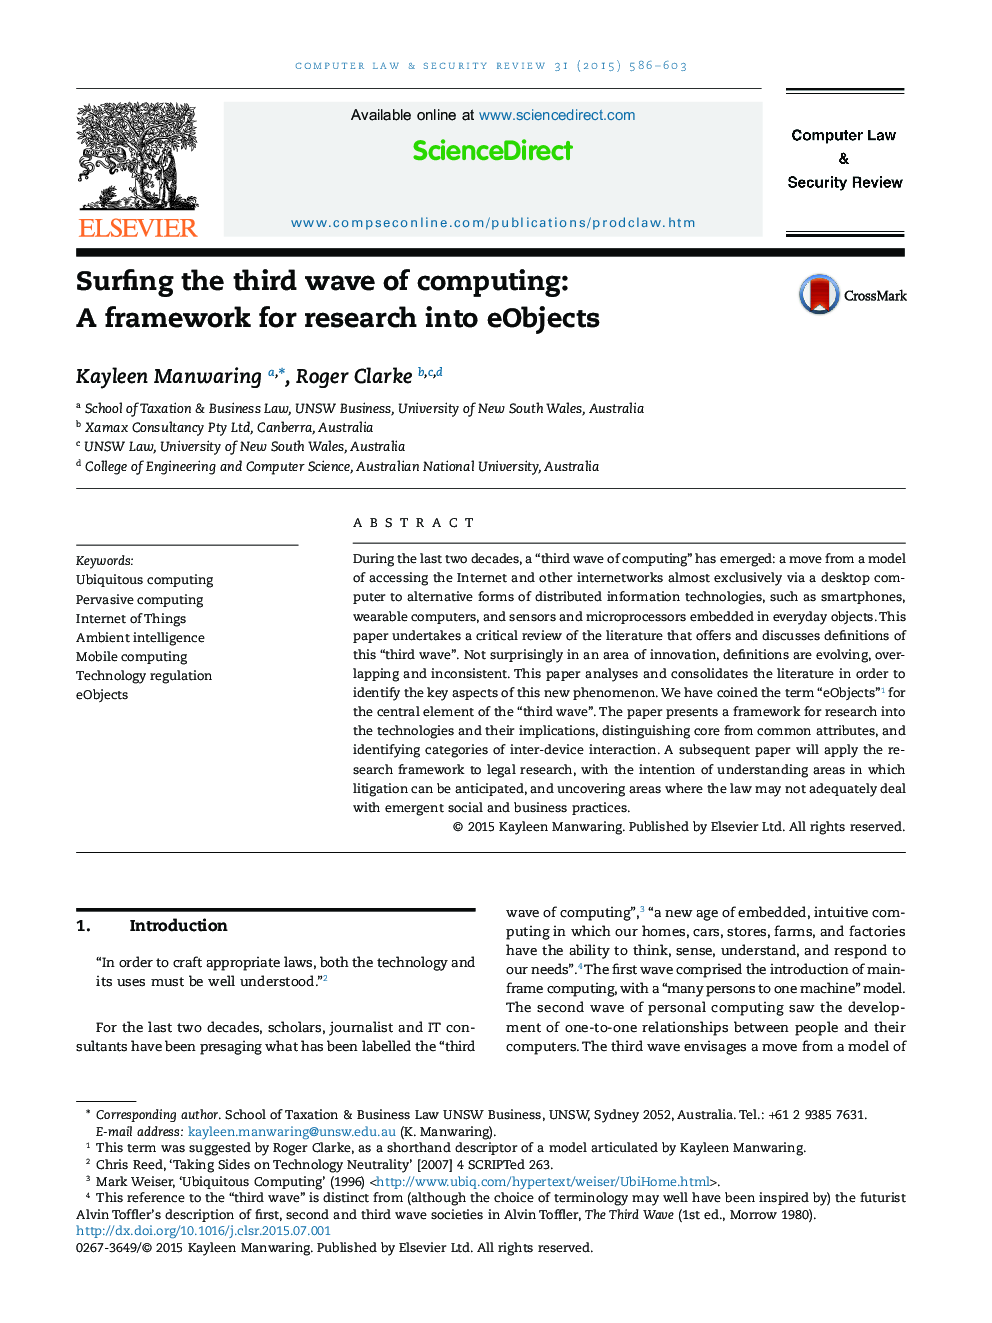 Surfing the third wave of computing: A framework for research into eObjects